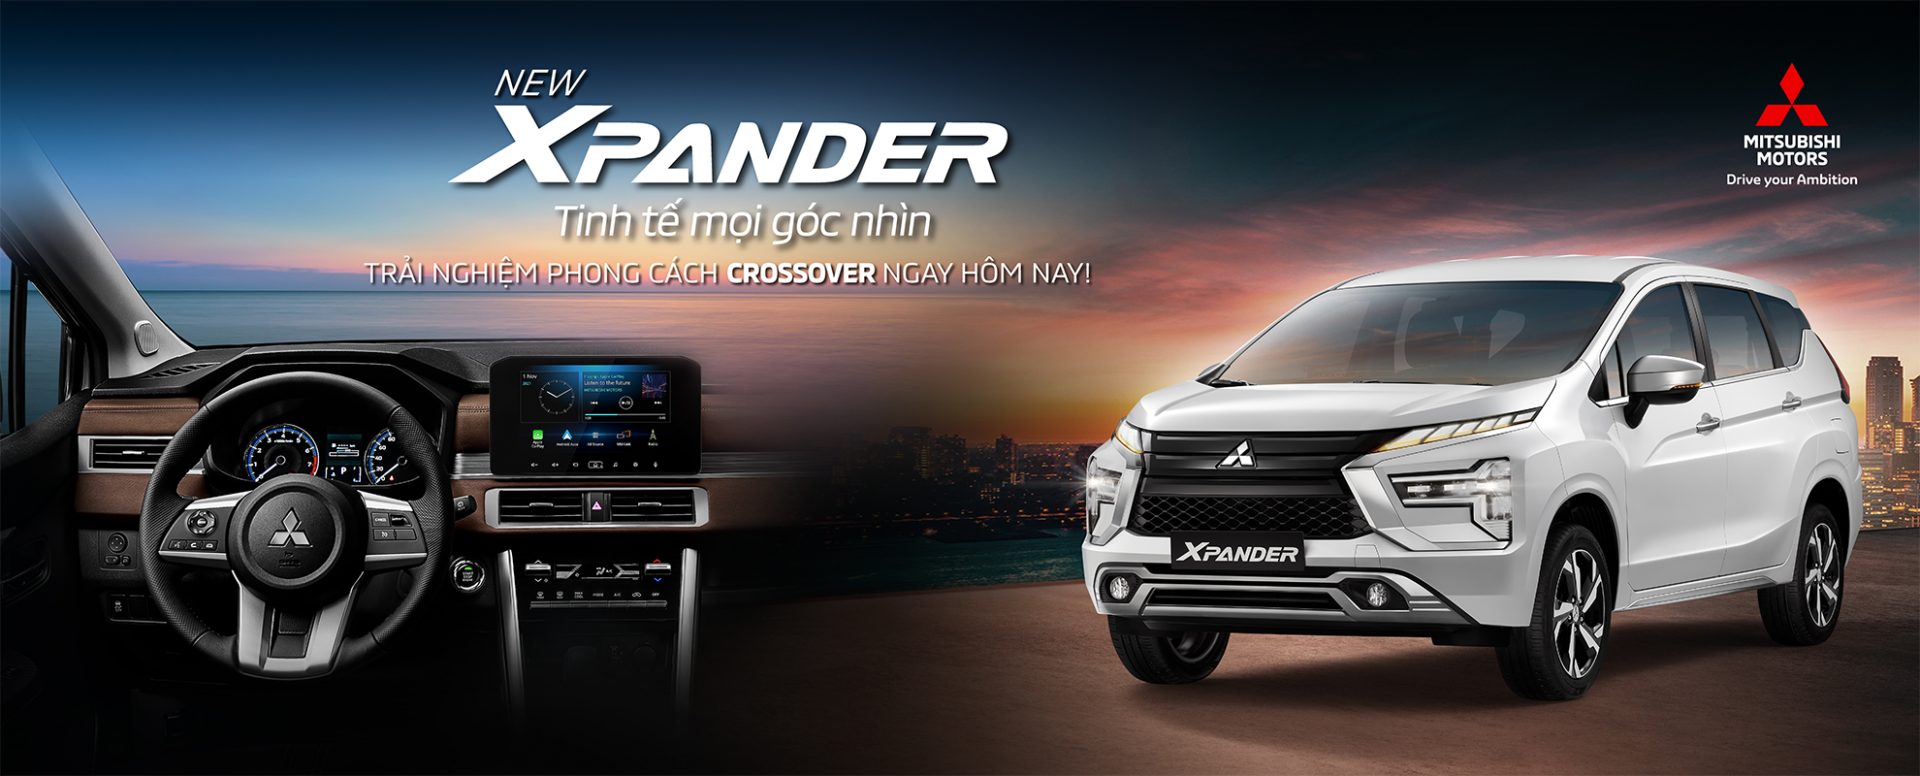 Mitsubishi Xpander 2022 – The Ultimate Car Package for Happy Family Experience